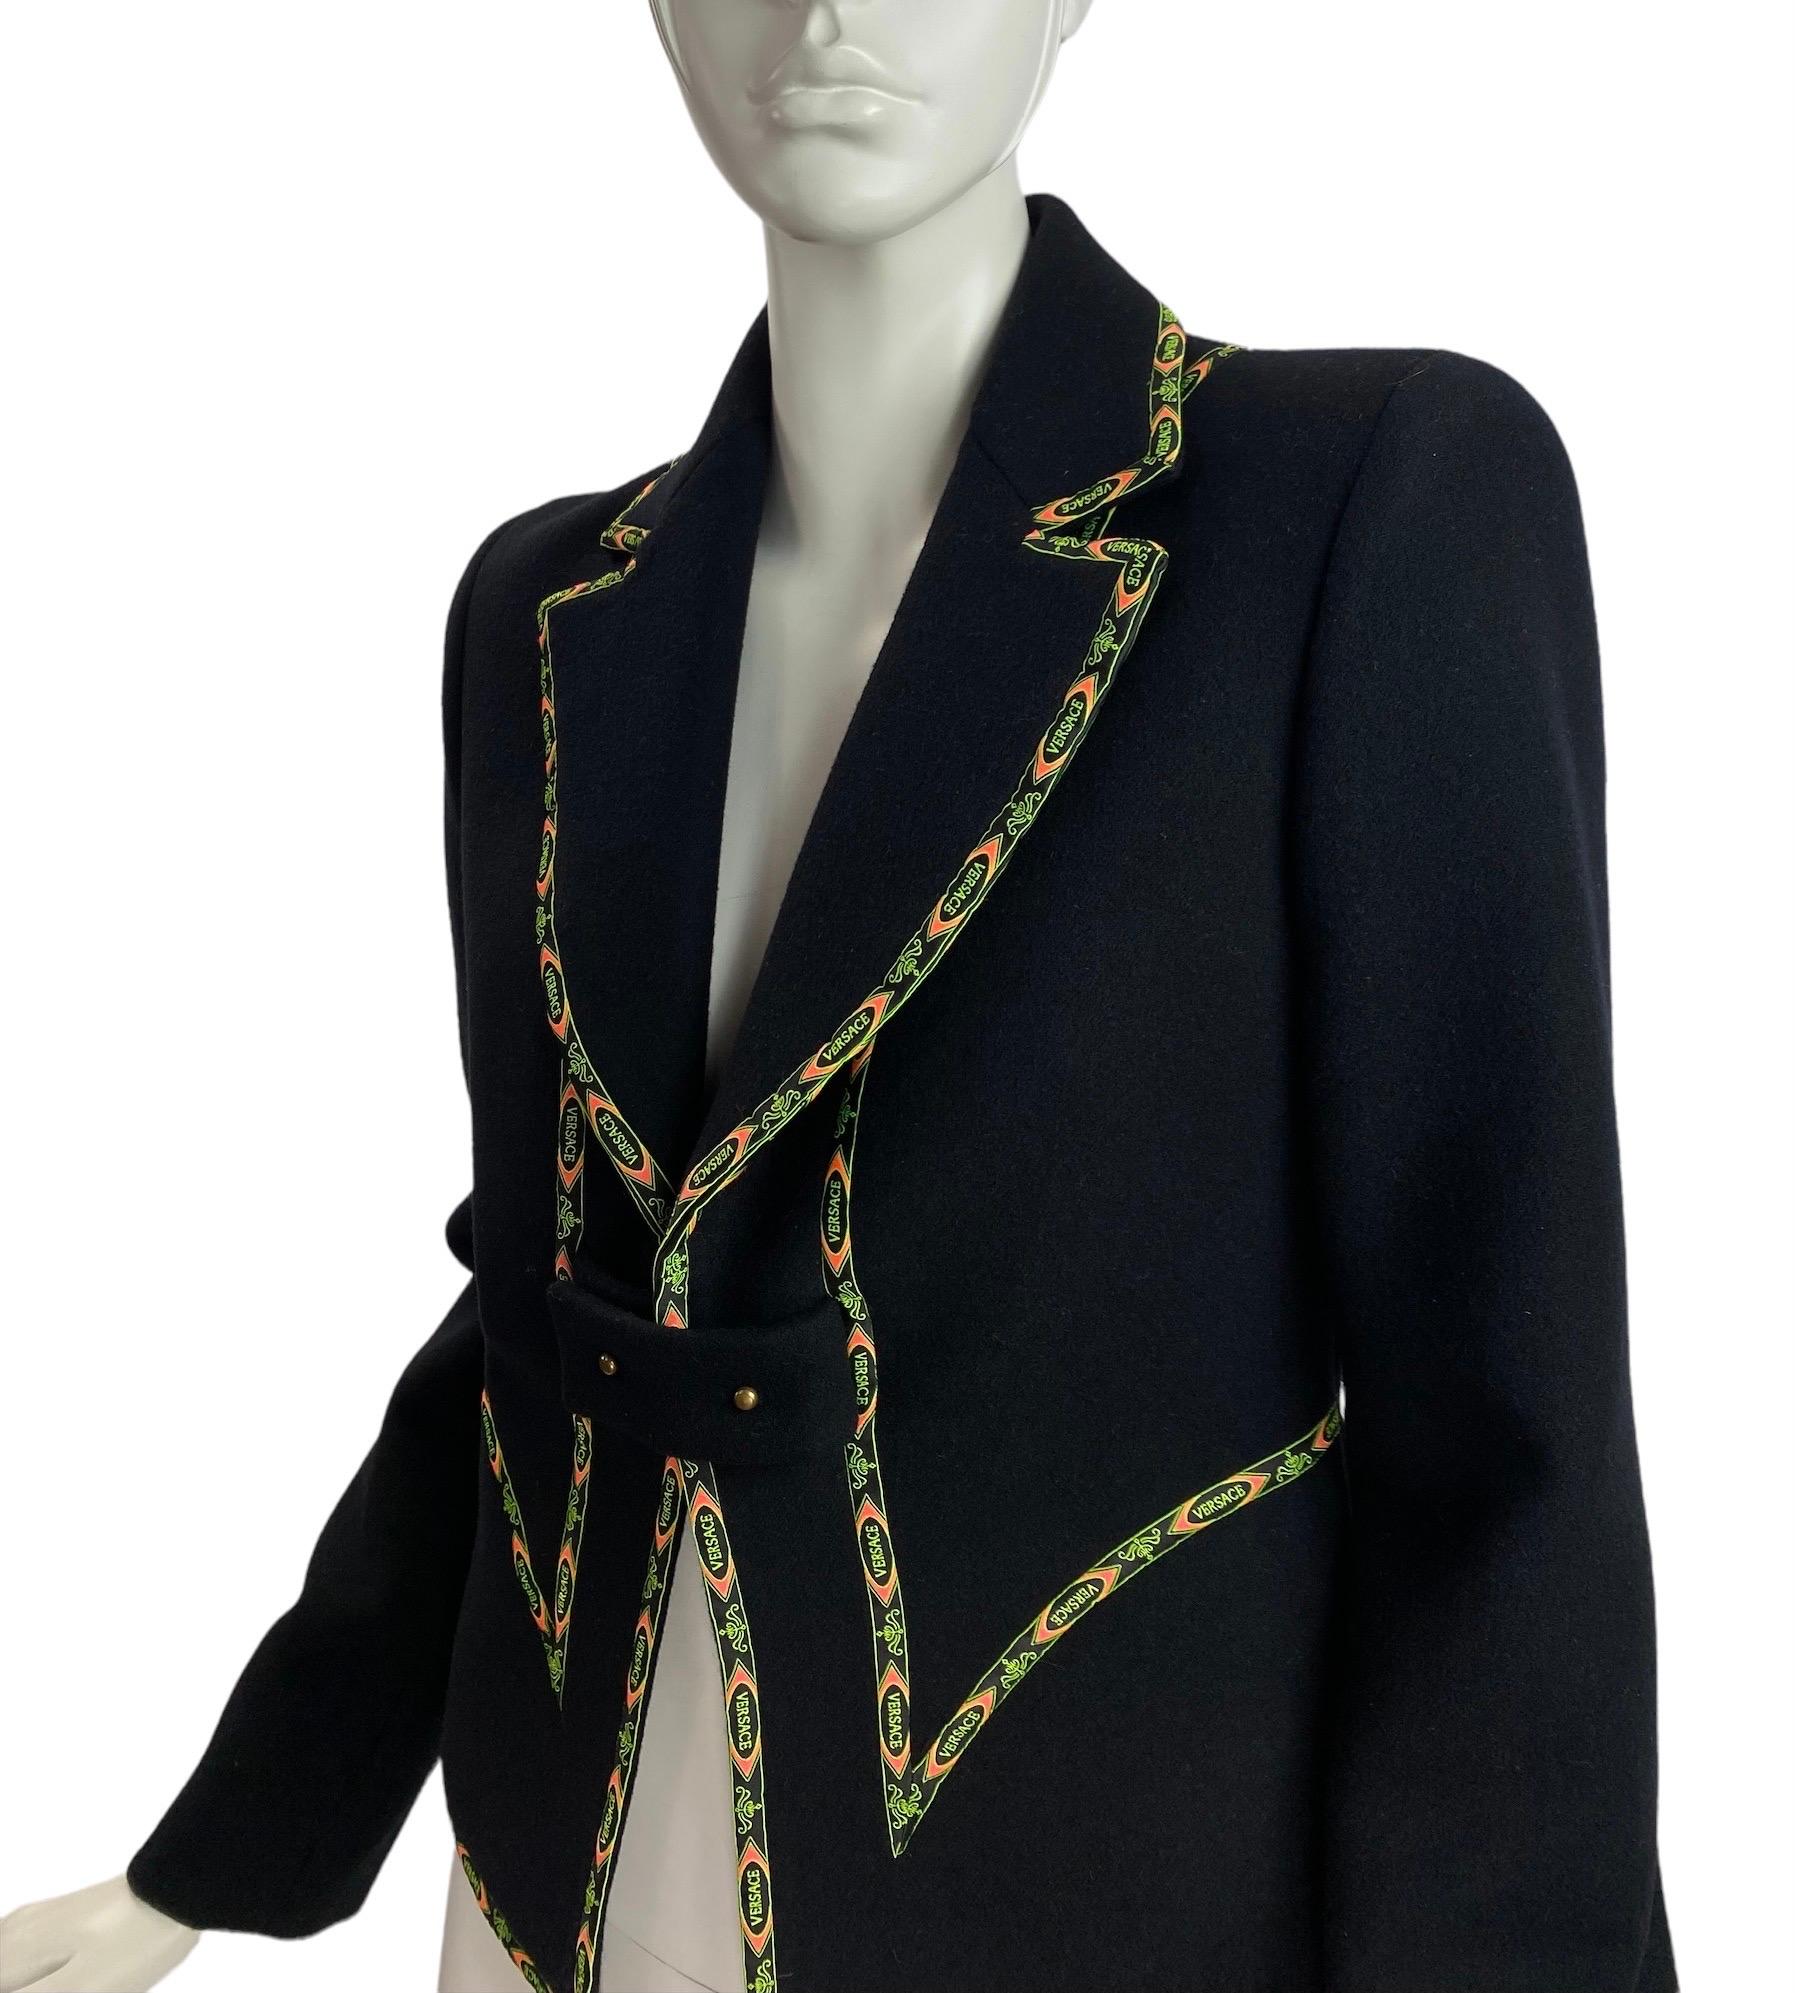 Vintage Gianni Versace Couture Black Blazer 
F/W 2002 Collection
Italian size 42 - US 6
Black color, 100% Wool, Versace signature trim, Fully lined.
Measurements: Bust 36 inches, Shoulders 16